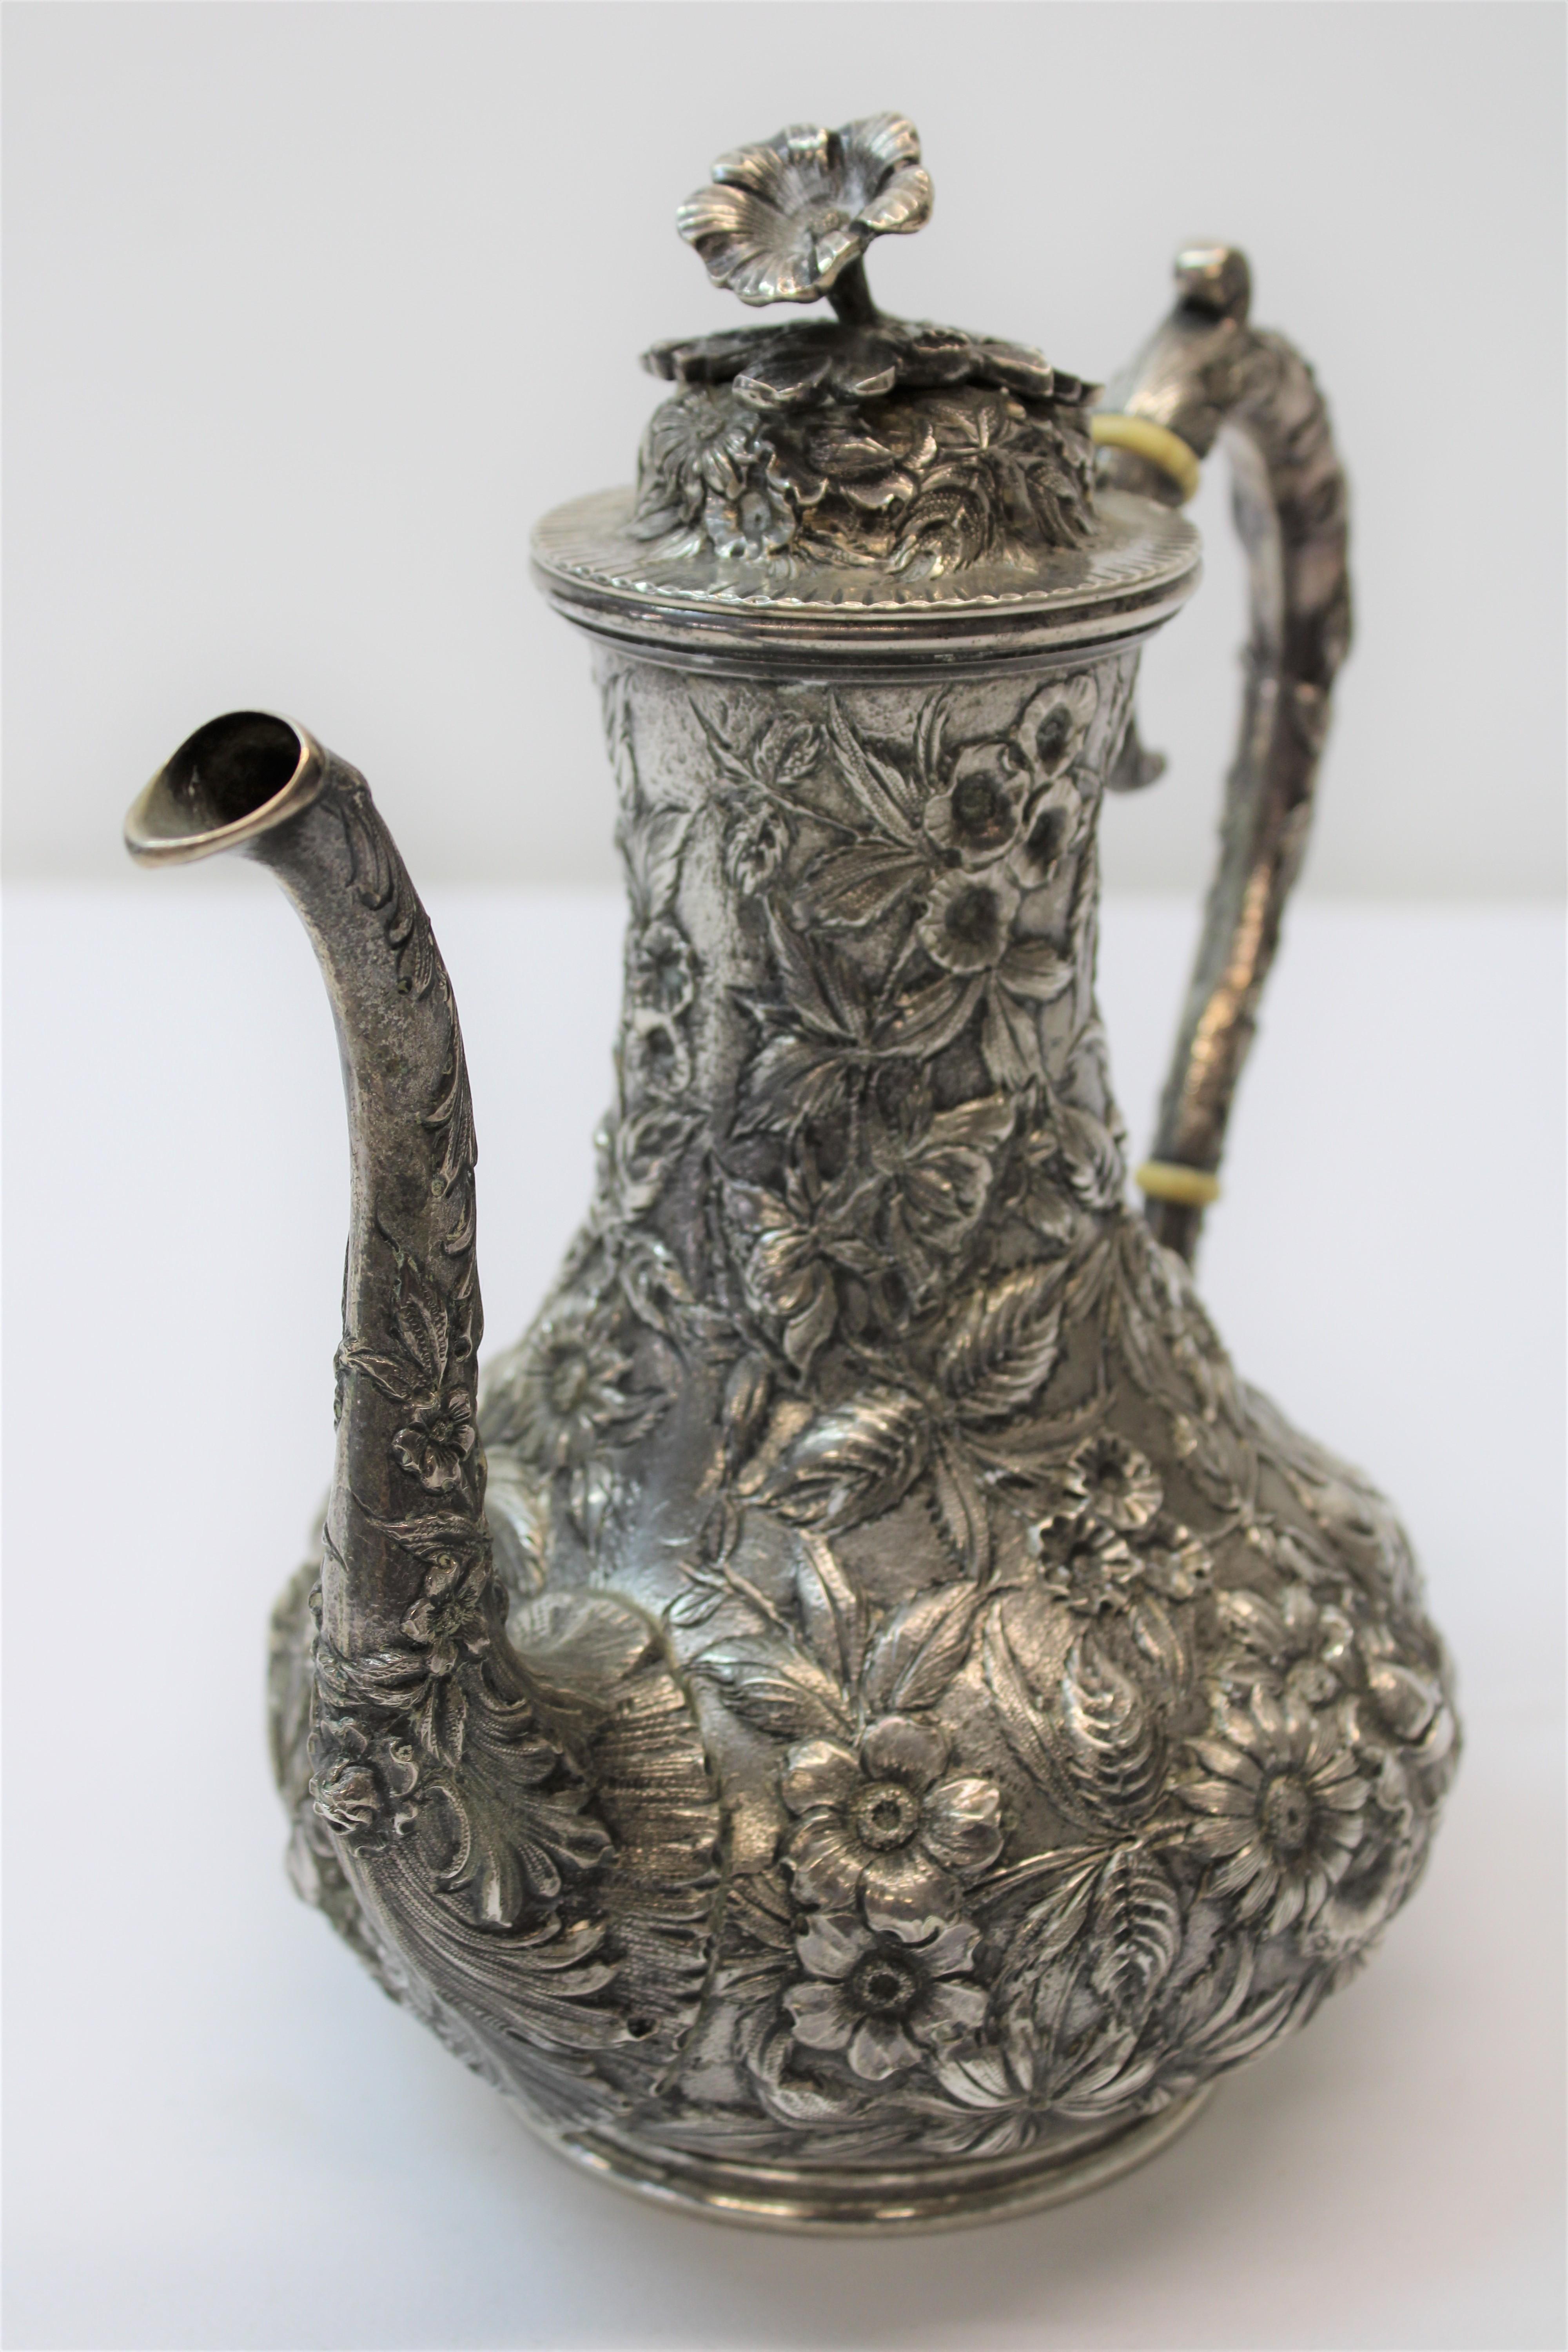 C. 20th century - Beautiful Fatima sterling silver repousse coffee pot w/ amazing detail. Made by S. Kirk & Son.